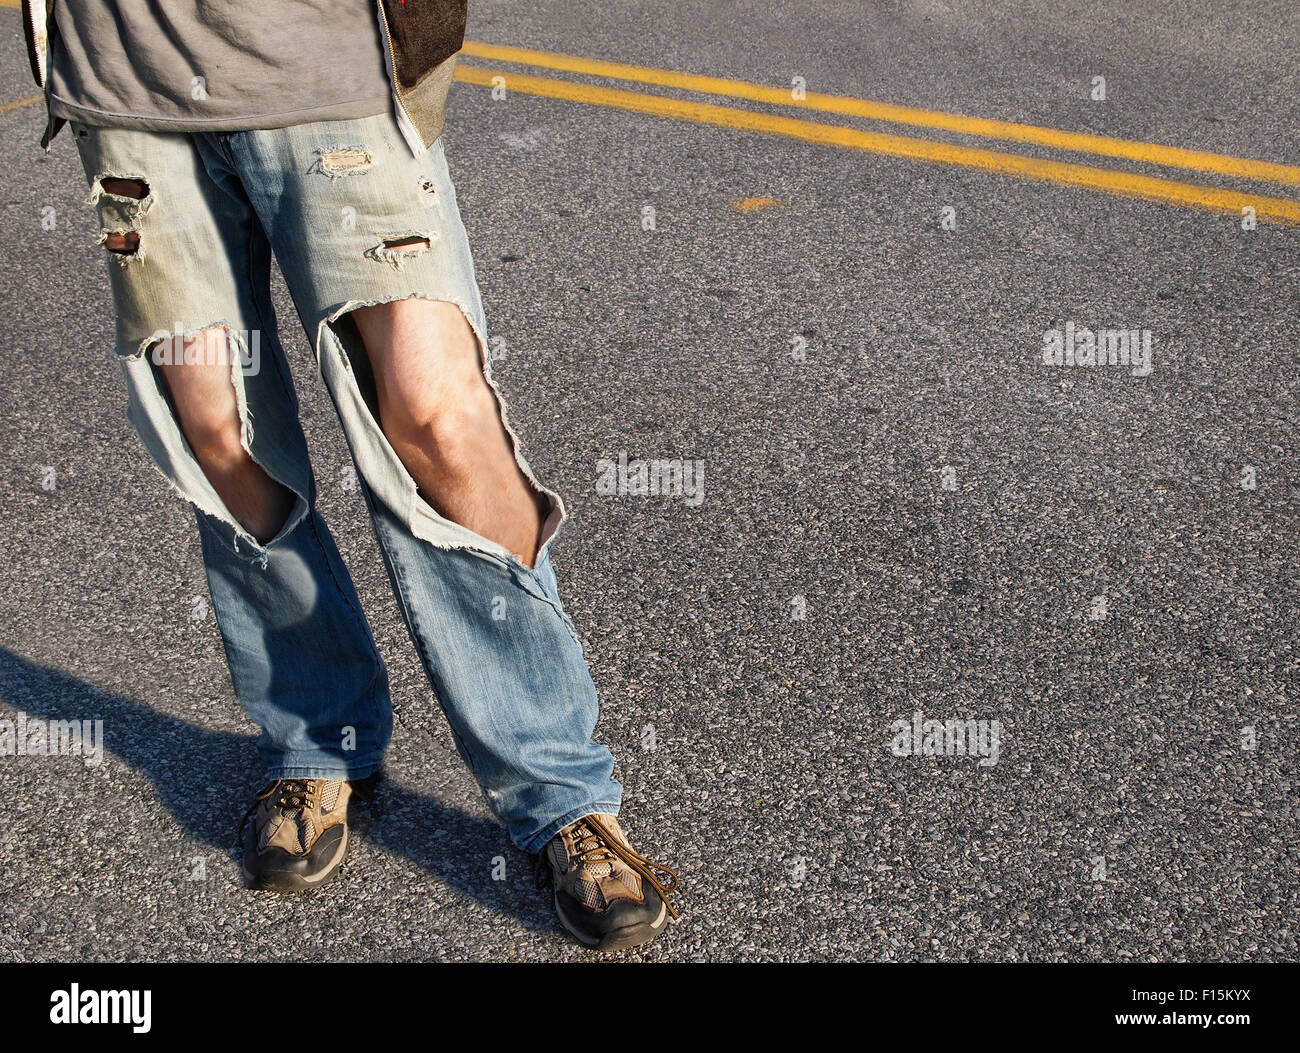 A young man, from the waist down,  in a causal t-shirt and ripped jeans with hair legs exposed stands in the road. Stock Photo